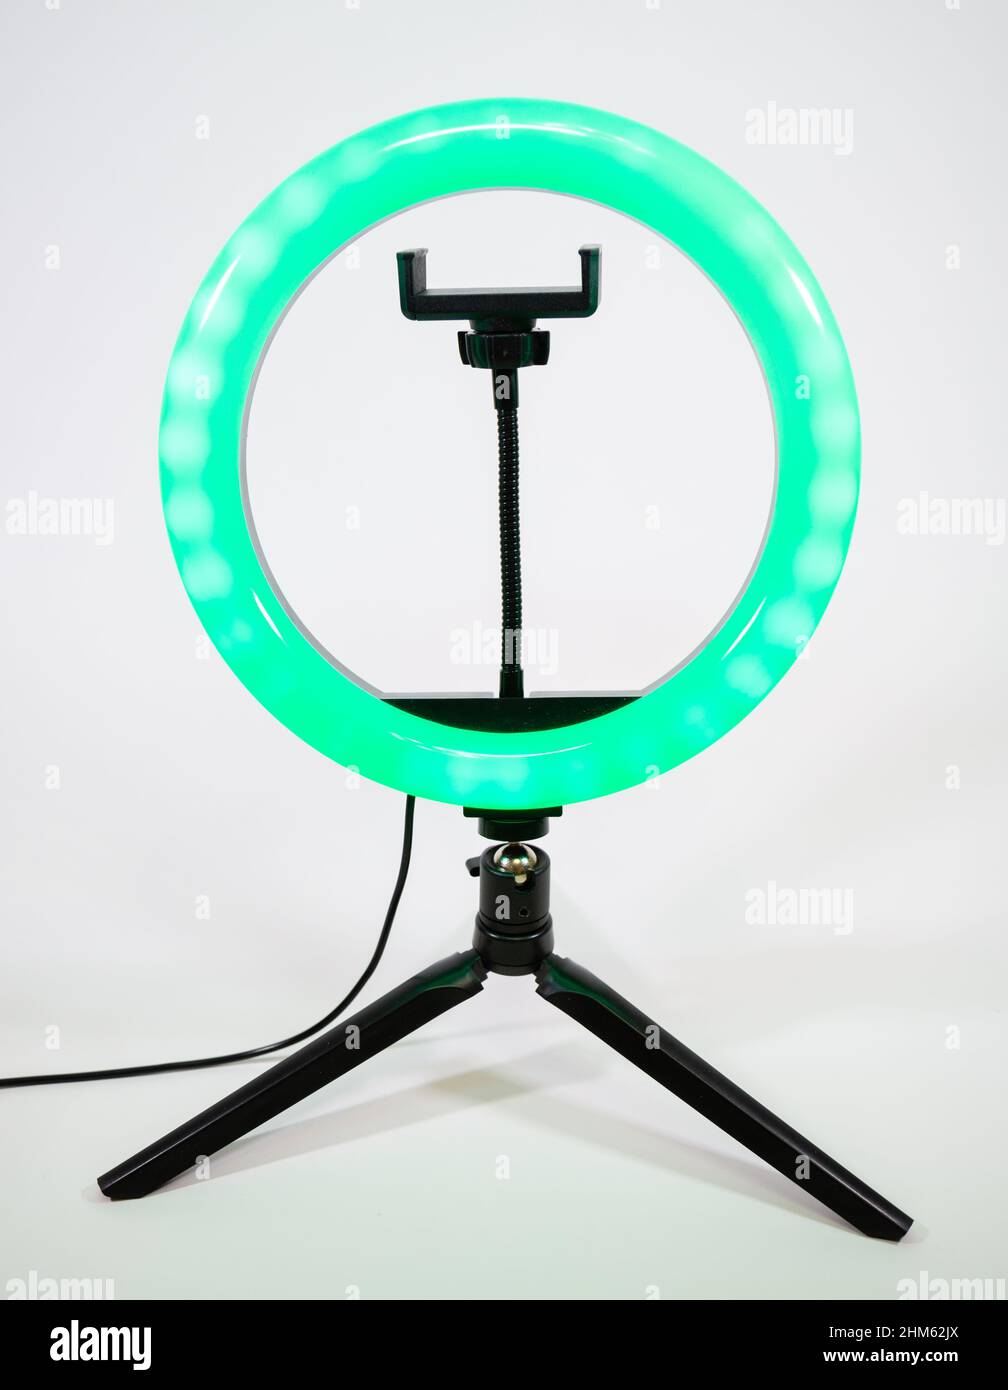 Ring lamp on a small tripod. Green light. Stock Photo